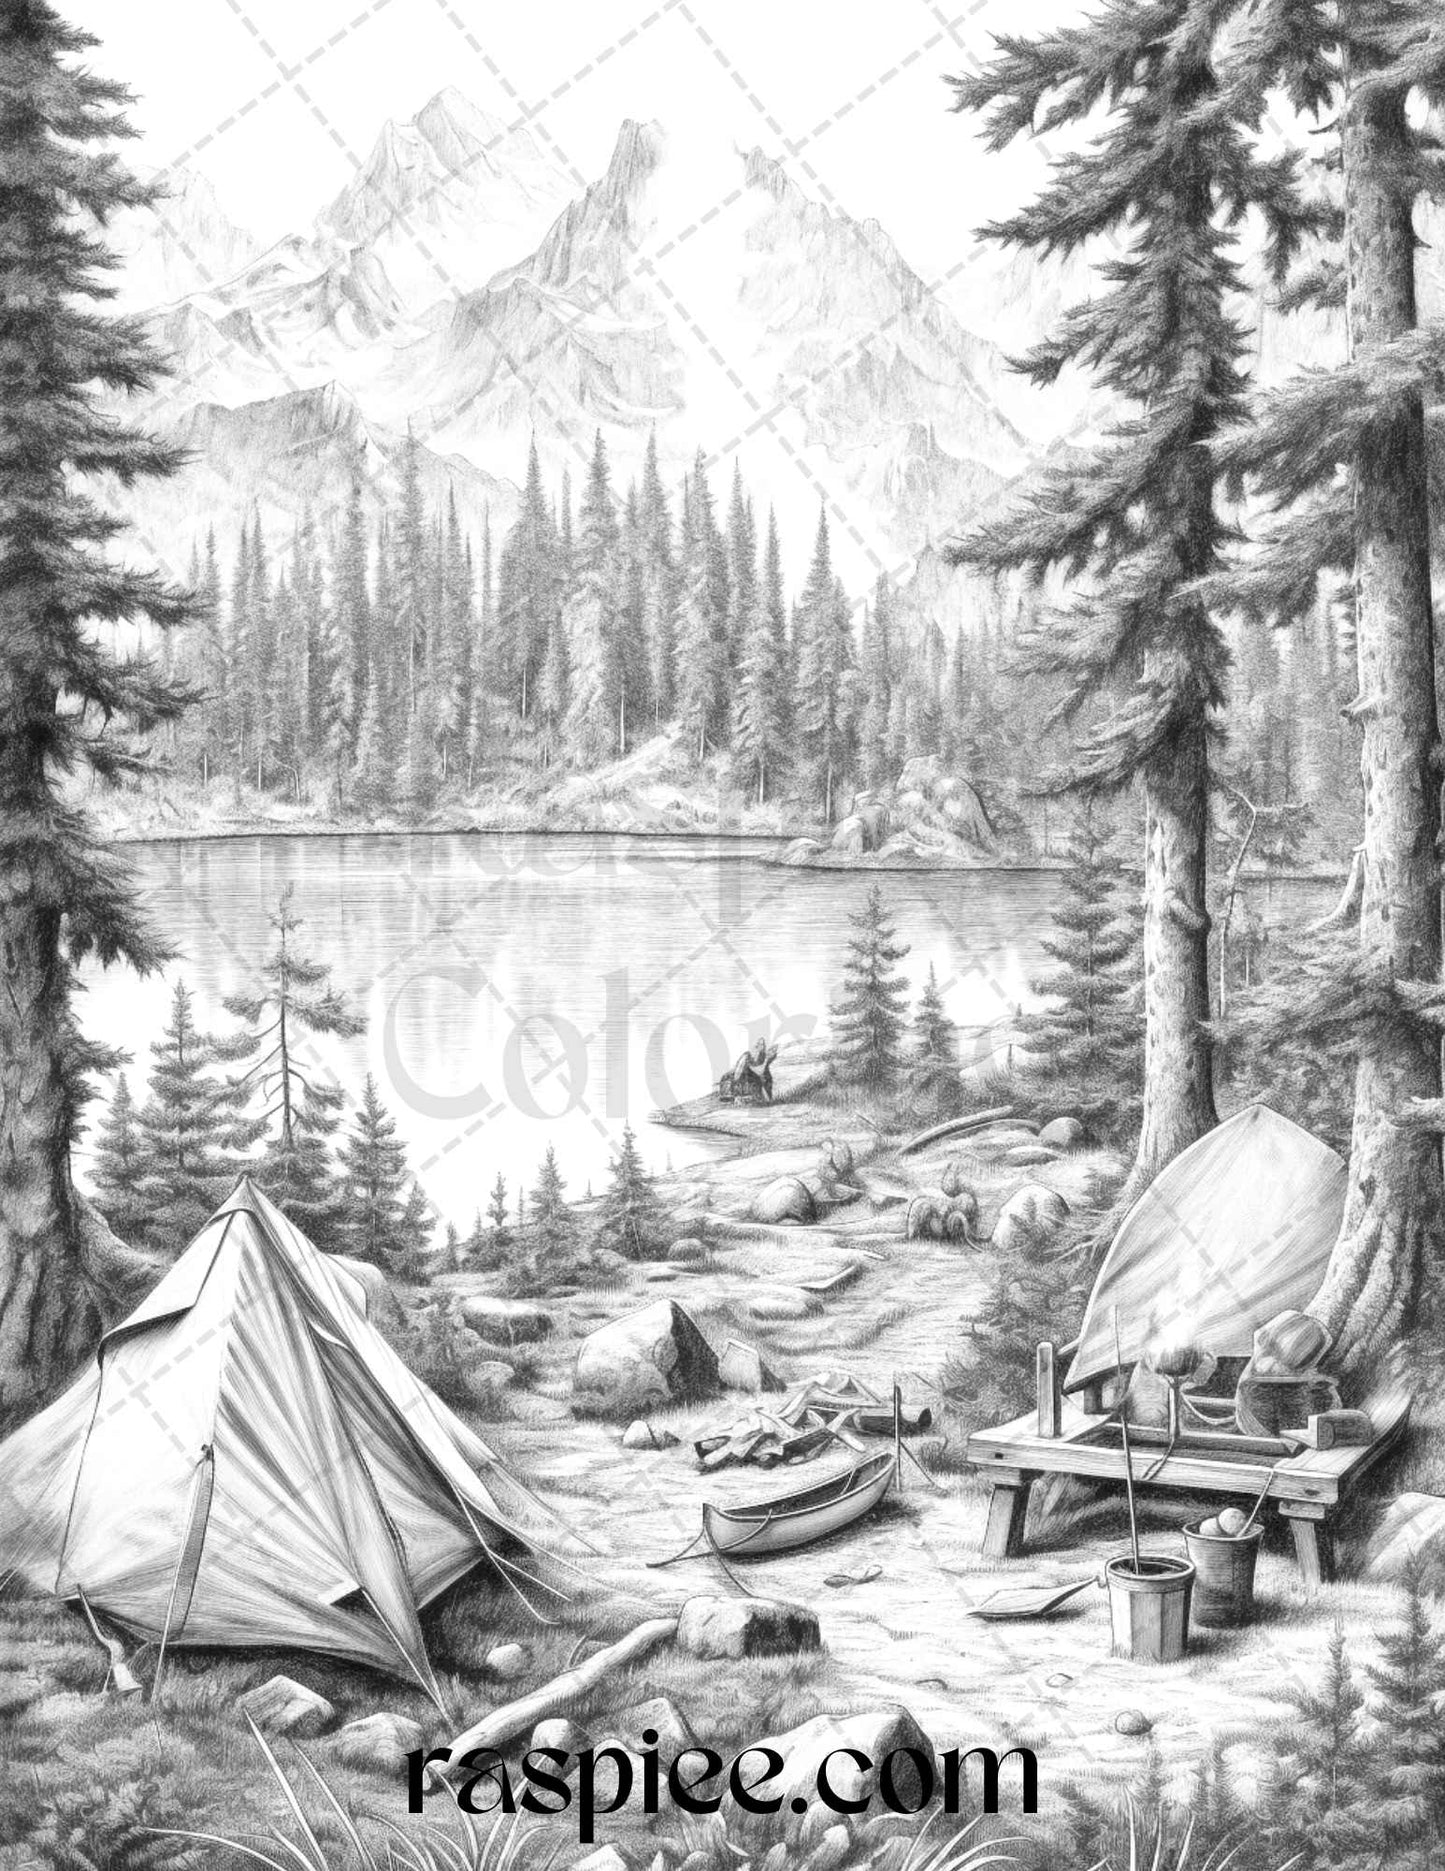 Nature Camping Grayscale Coloring Pages Printable, Relaxing Outdoor Scenes, PDF File Instant Download - raspiee